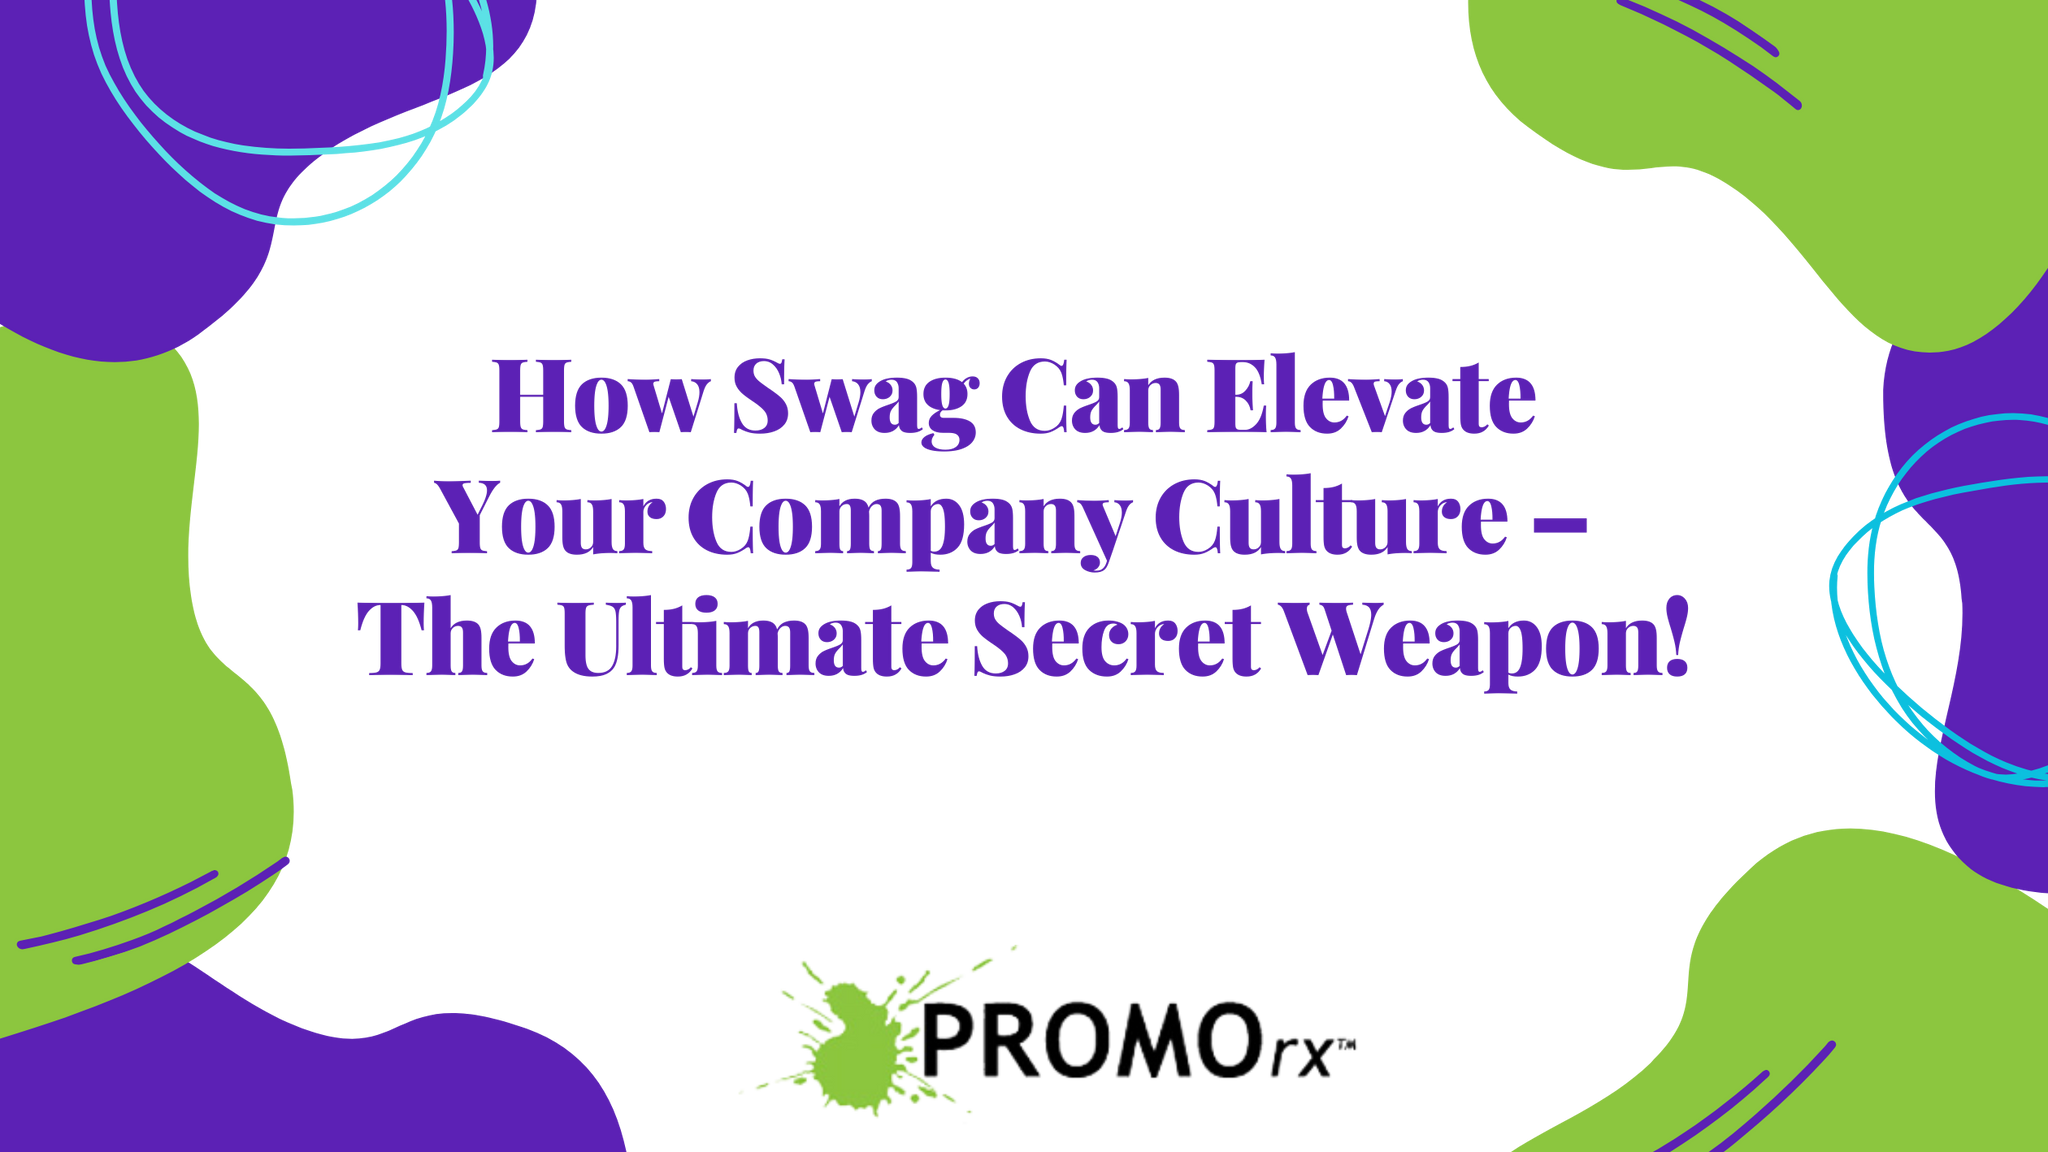 How Swag Can Elevate Your Company Culture – The Ultimate Secret Weapon!